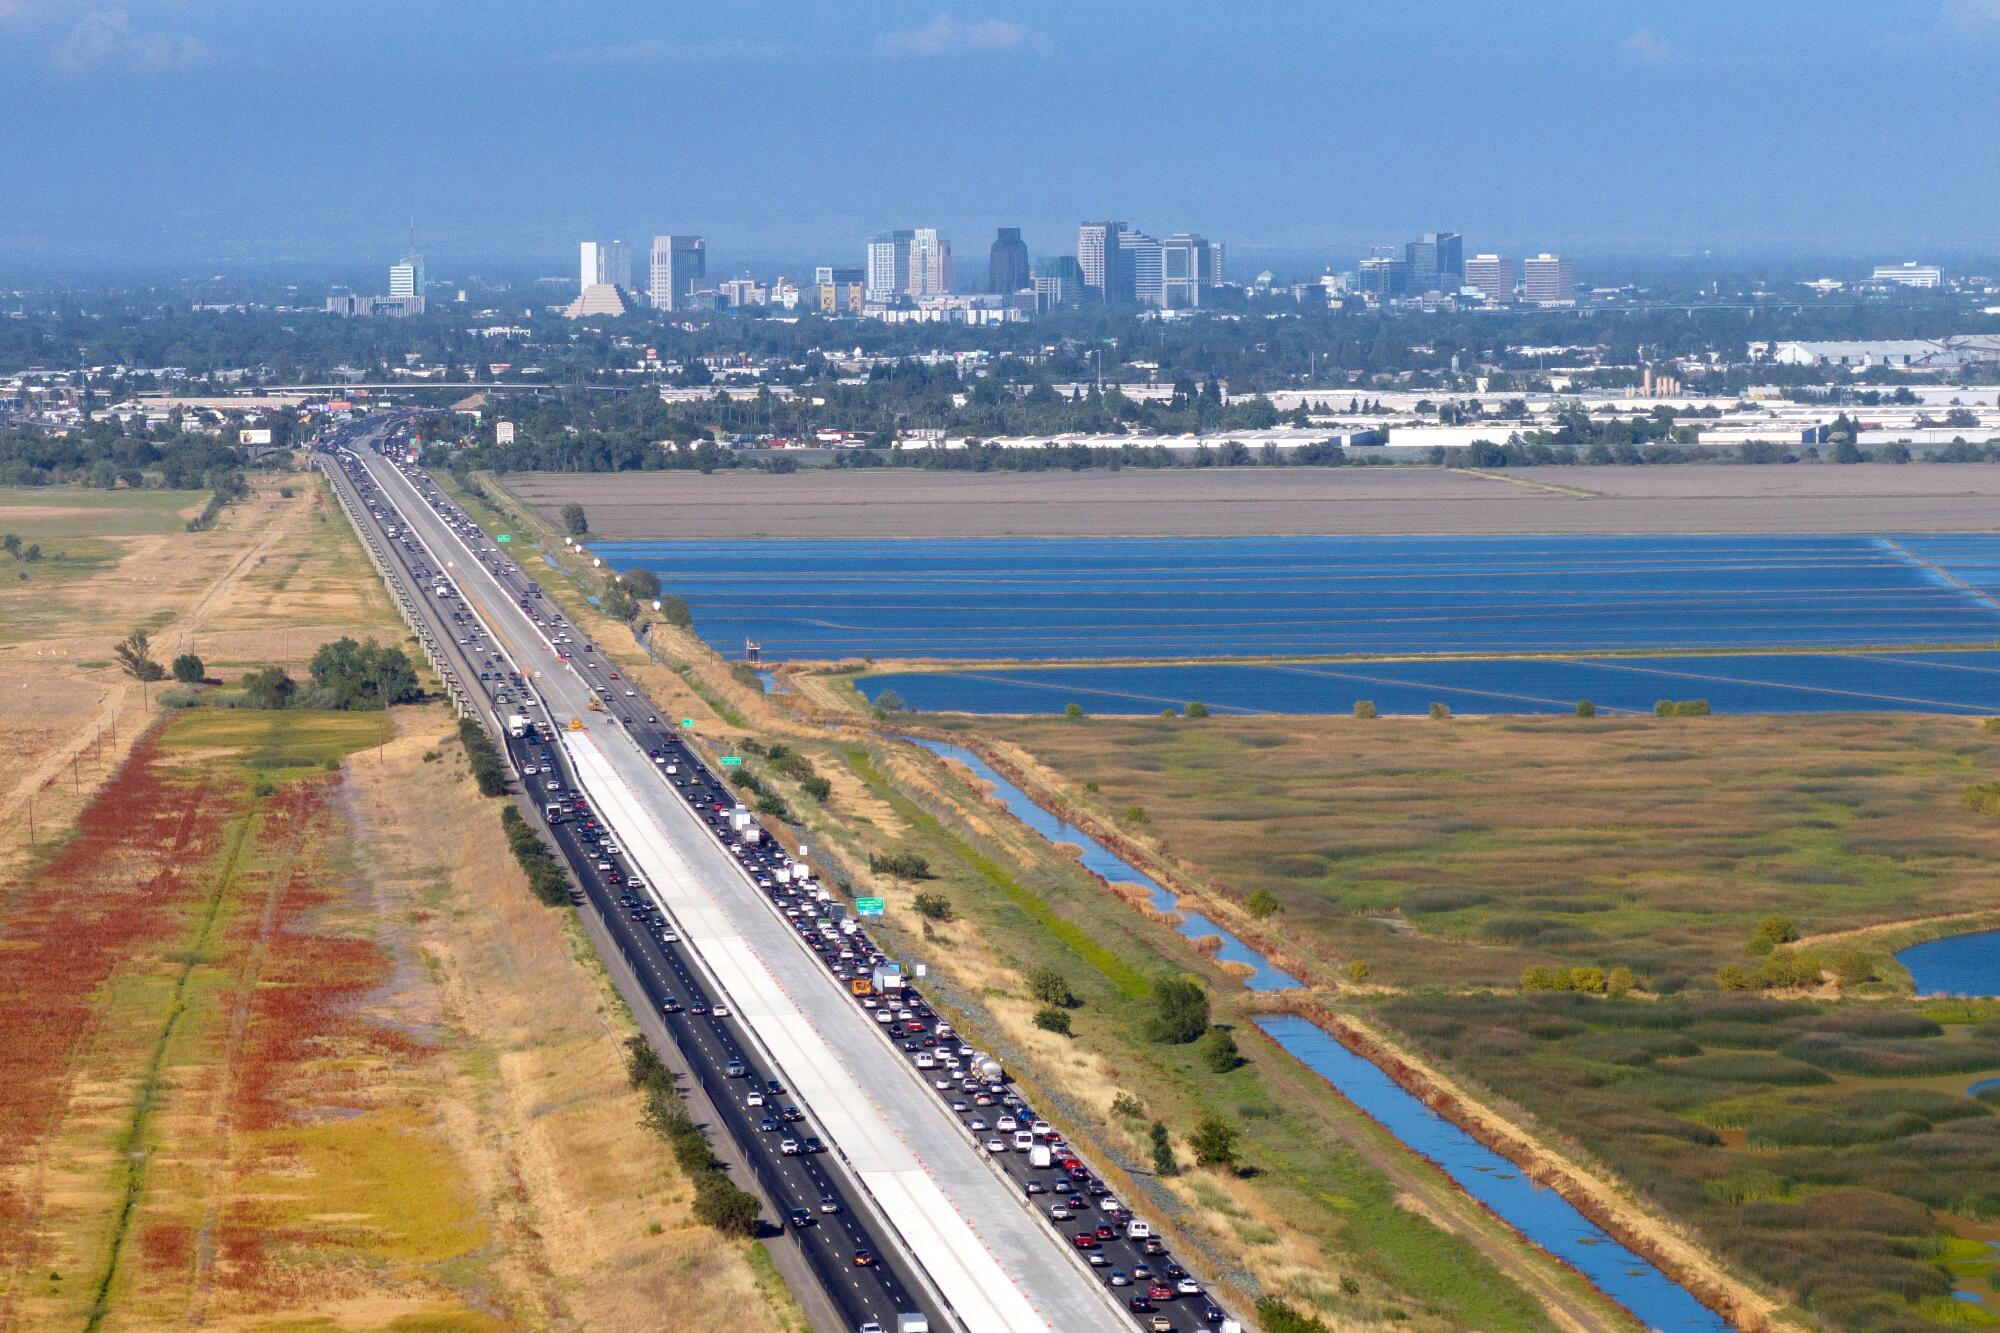 The highway leading to the capitol, a 3-mile causeway over Yolo